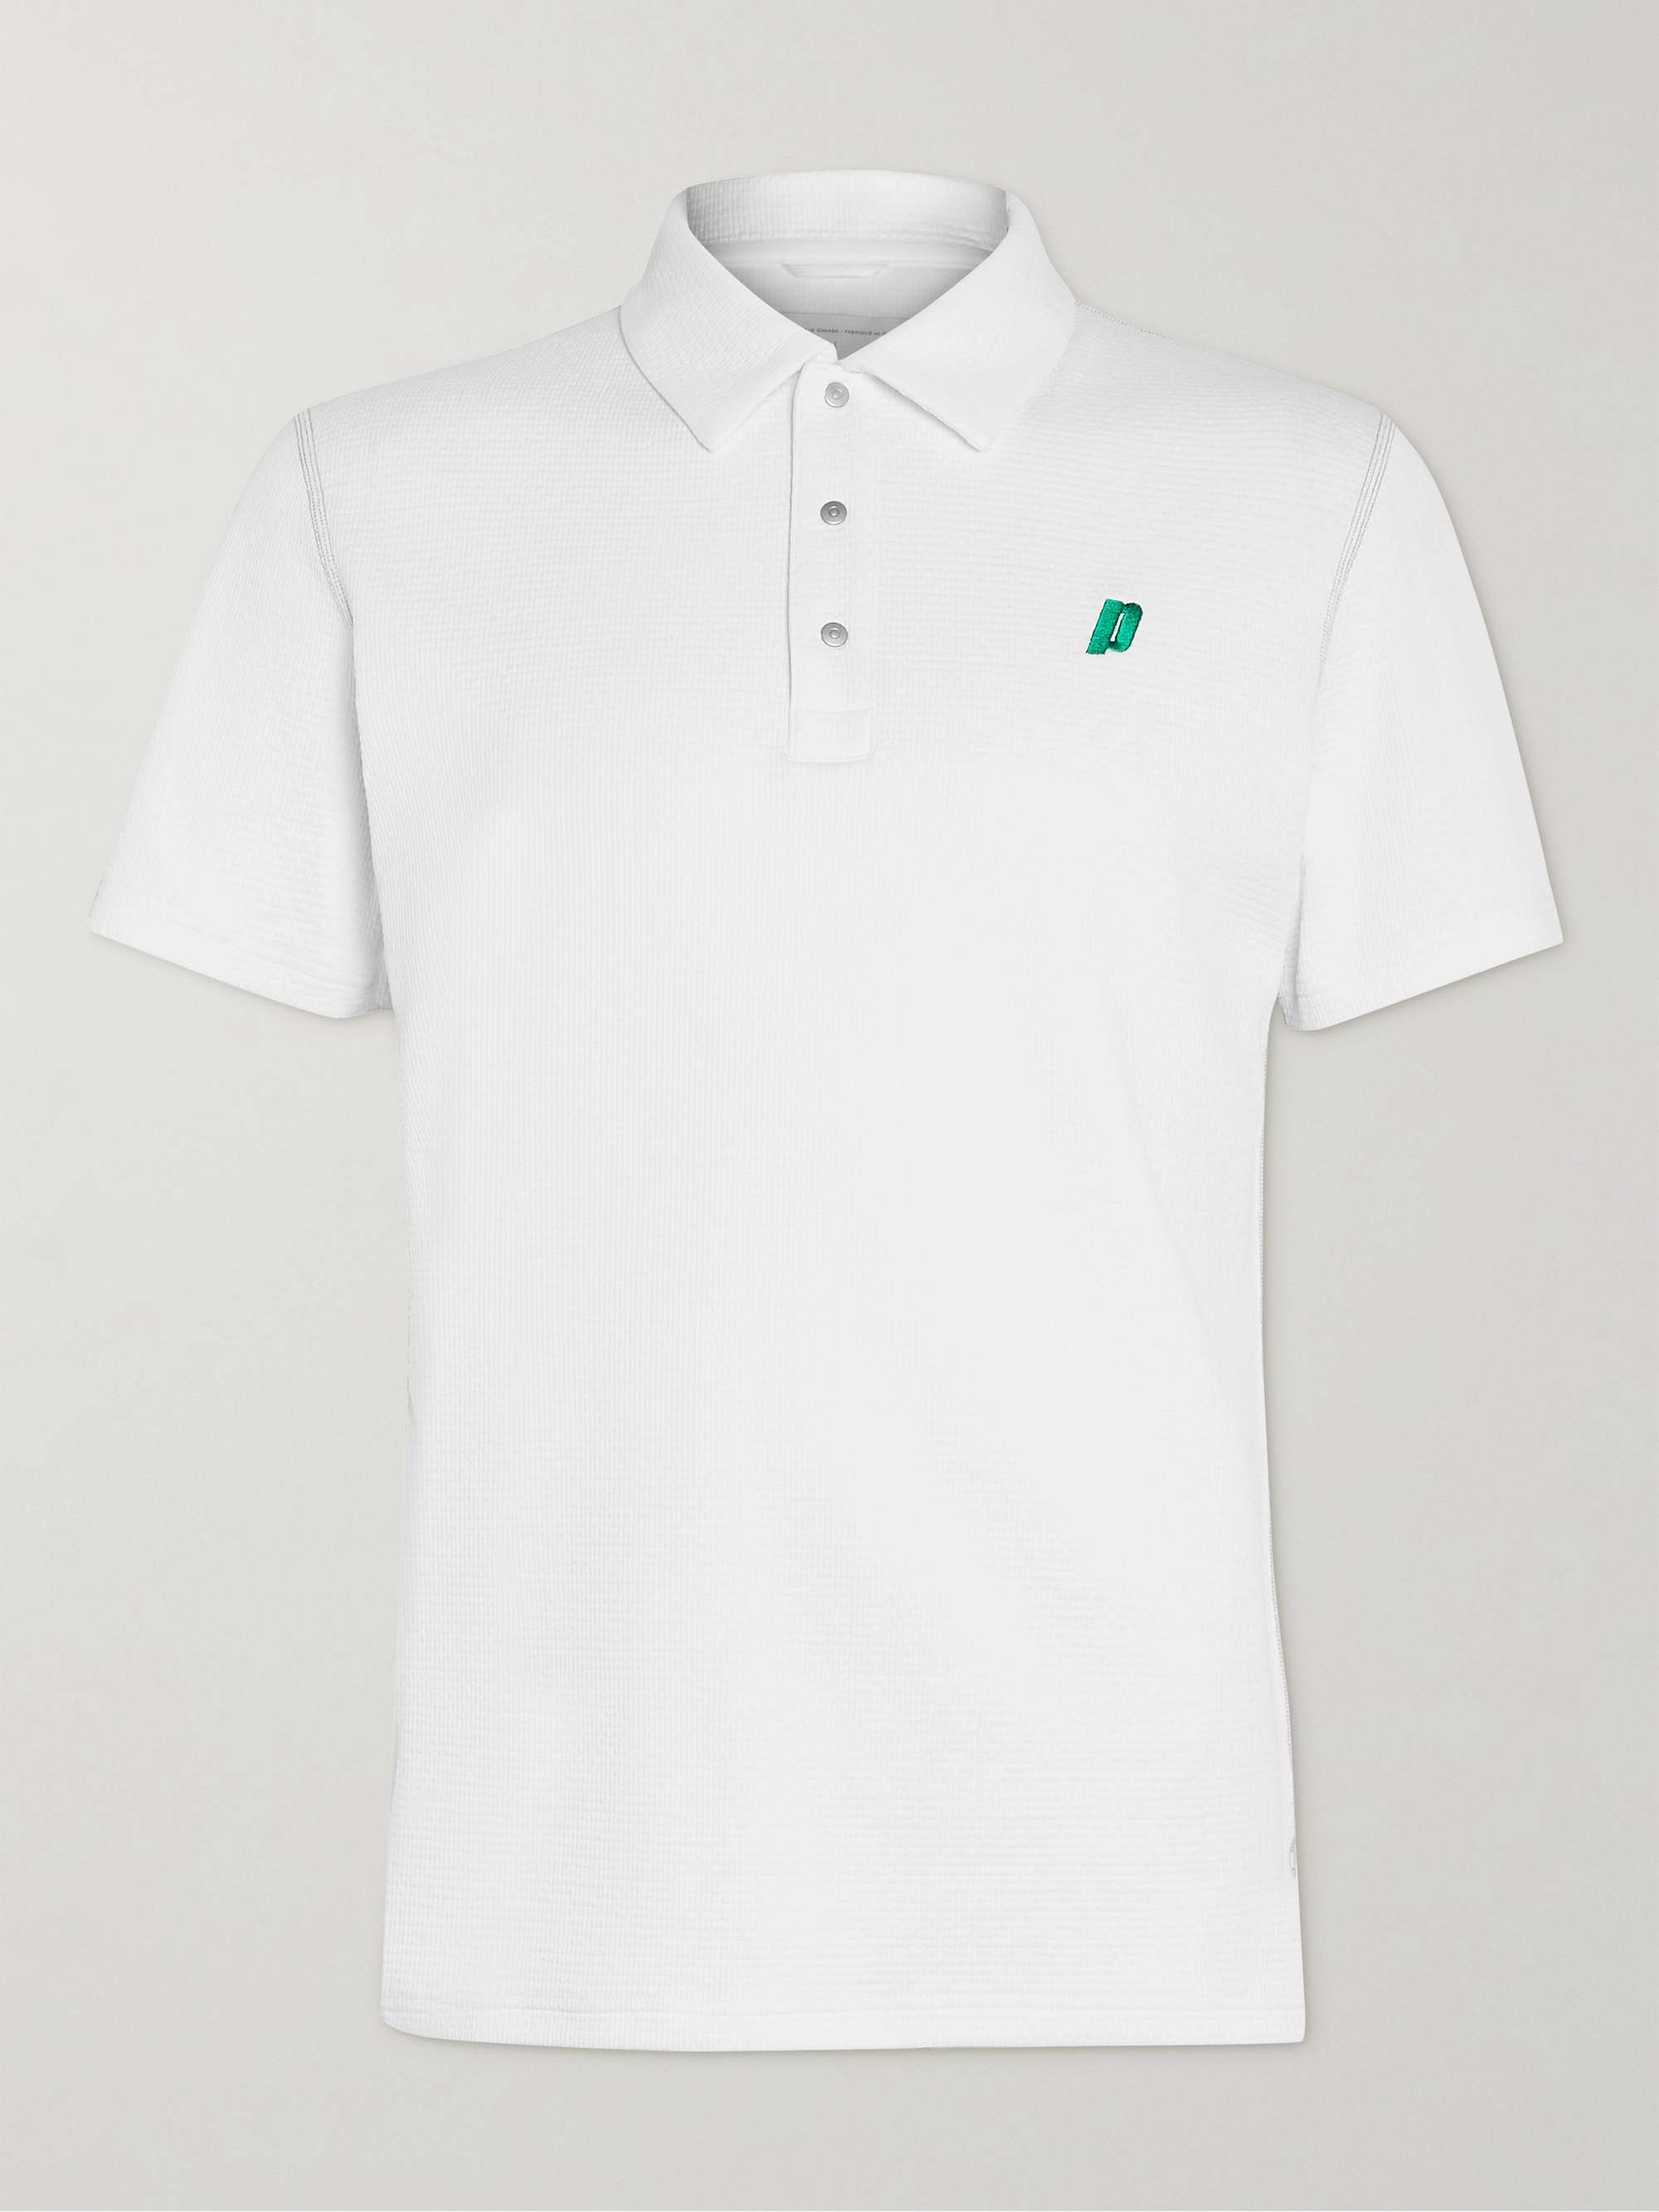 REIGNING CHAMP + Prince Logo-Embroidered Solotex Mesh Tennis Polo Shirt